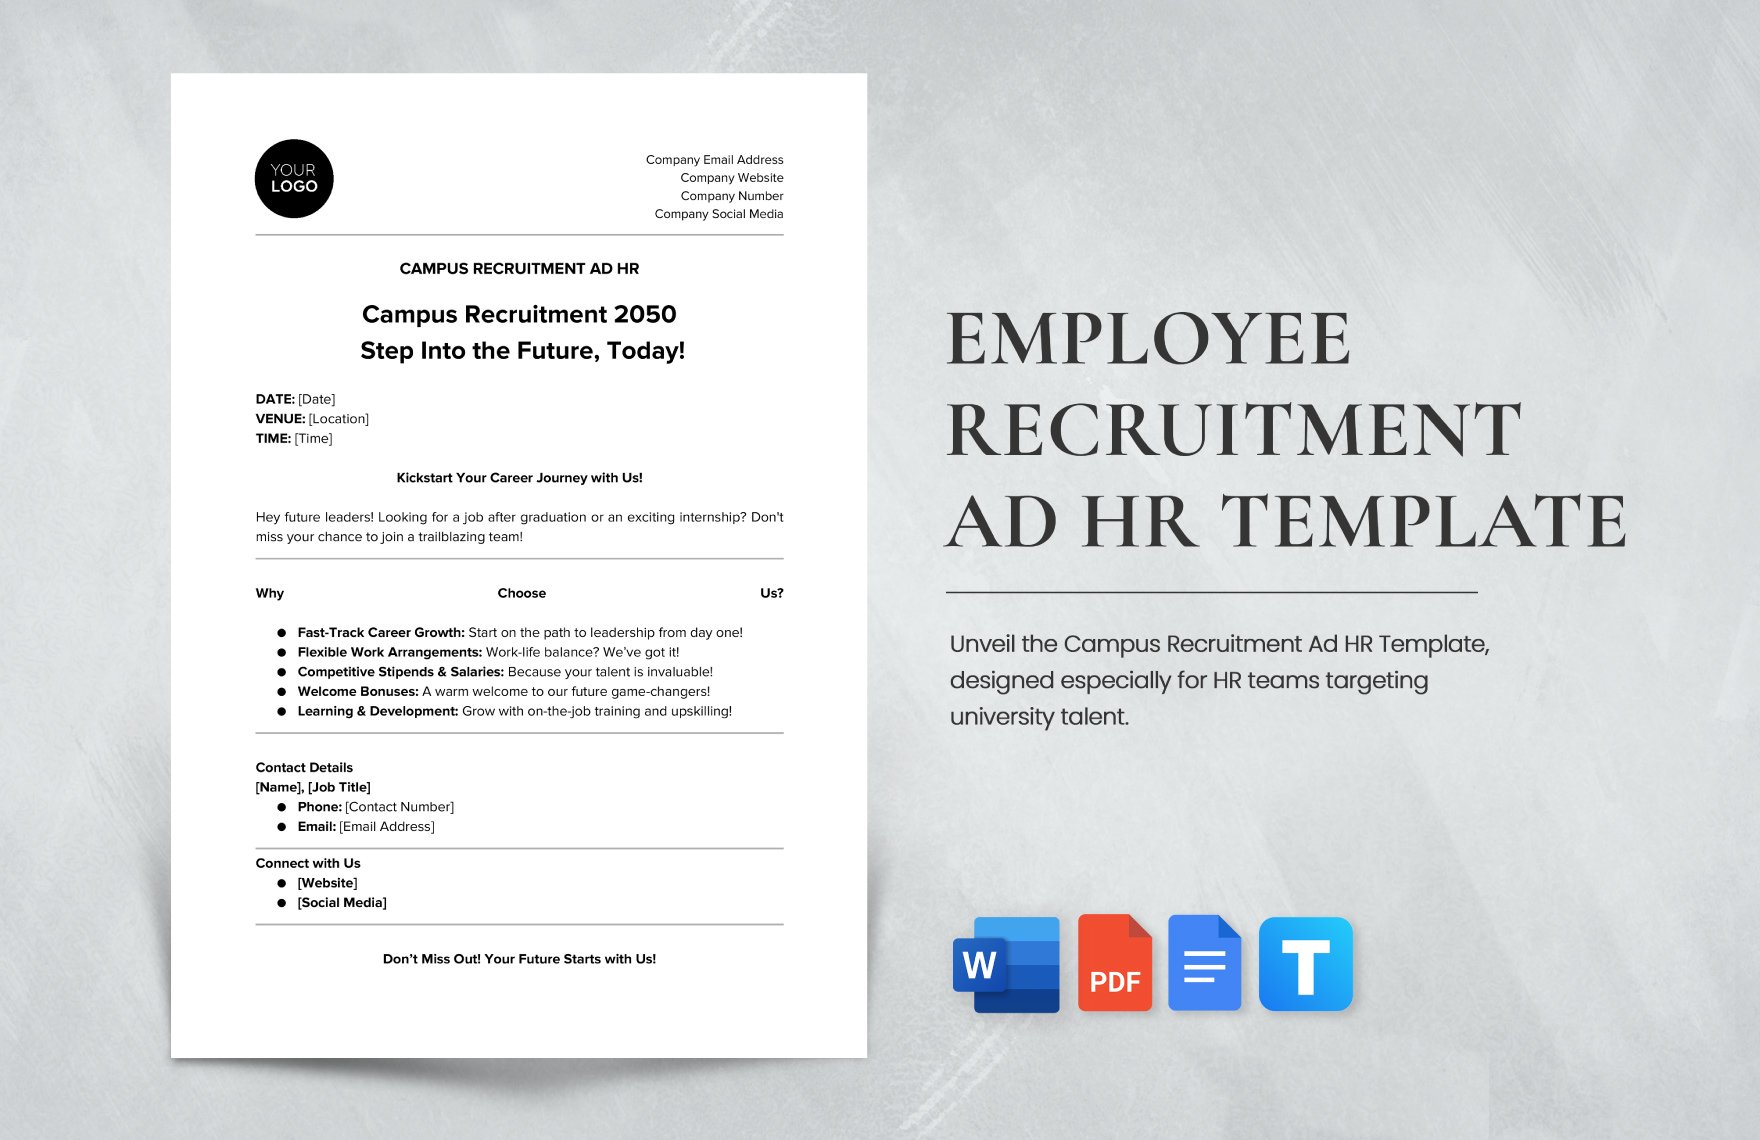 Employee Recruitment Ad HR Template in Word, Google Docs, PDF